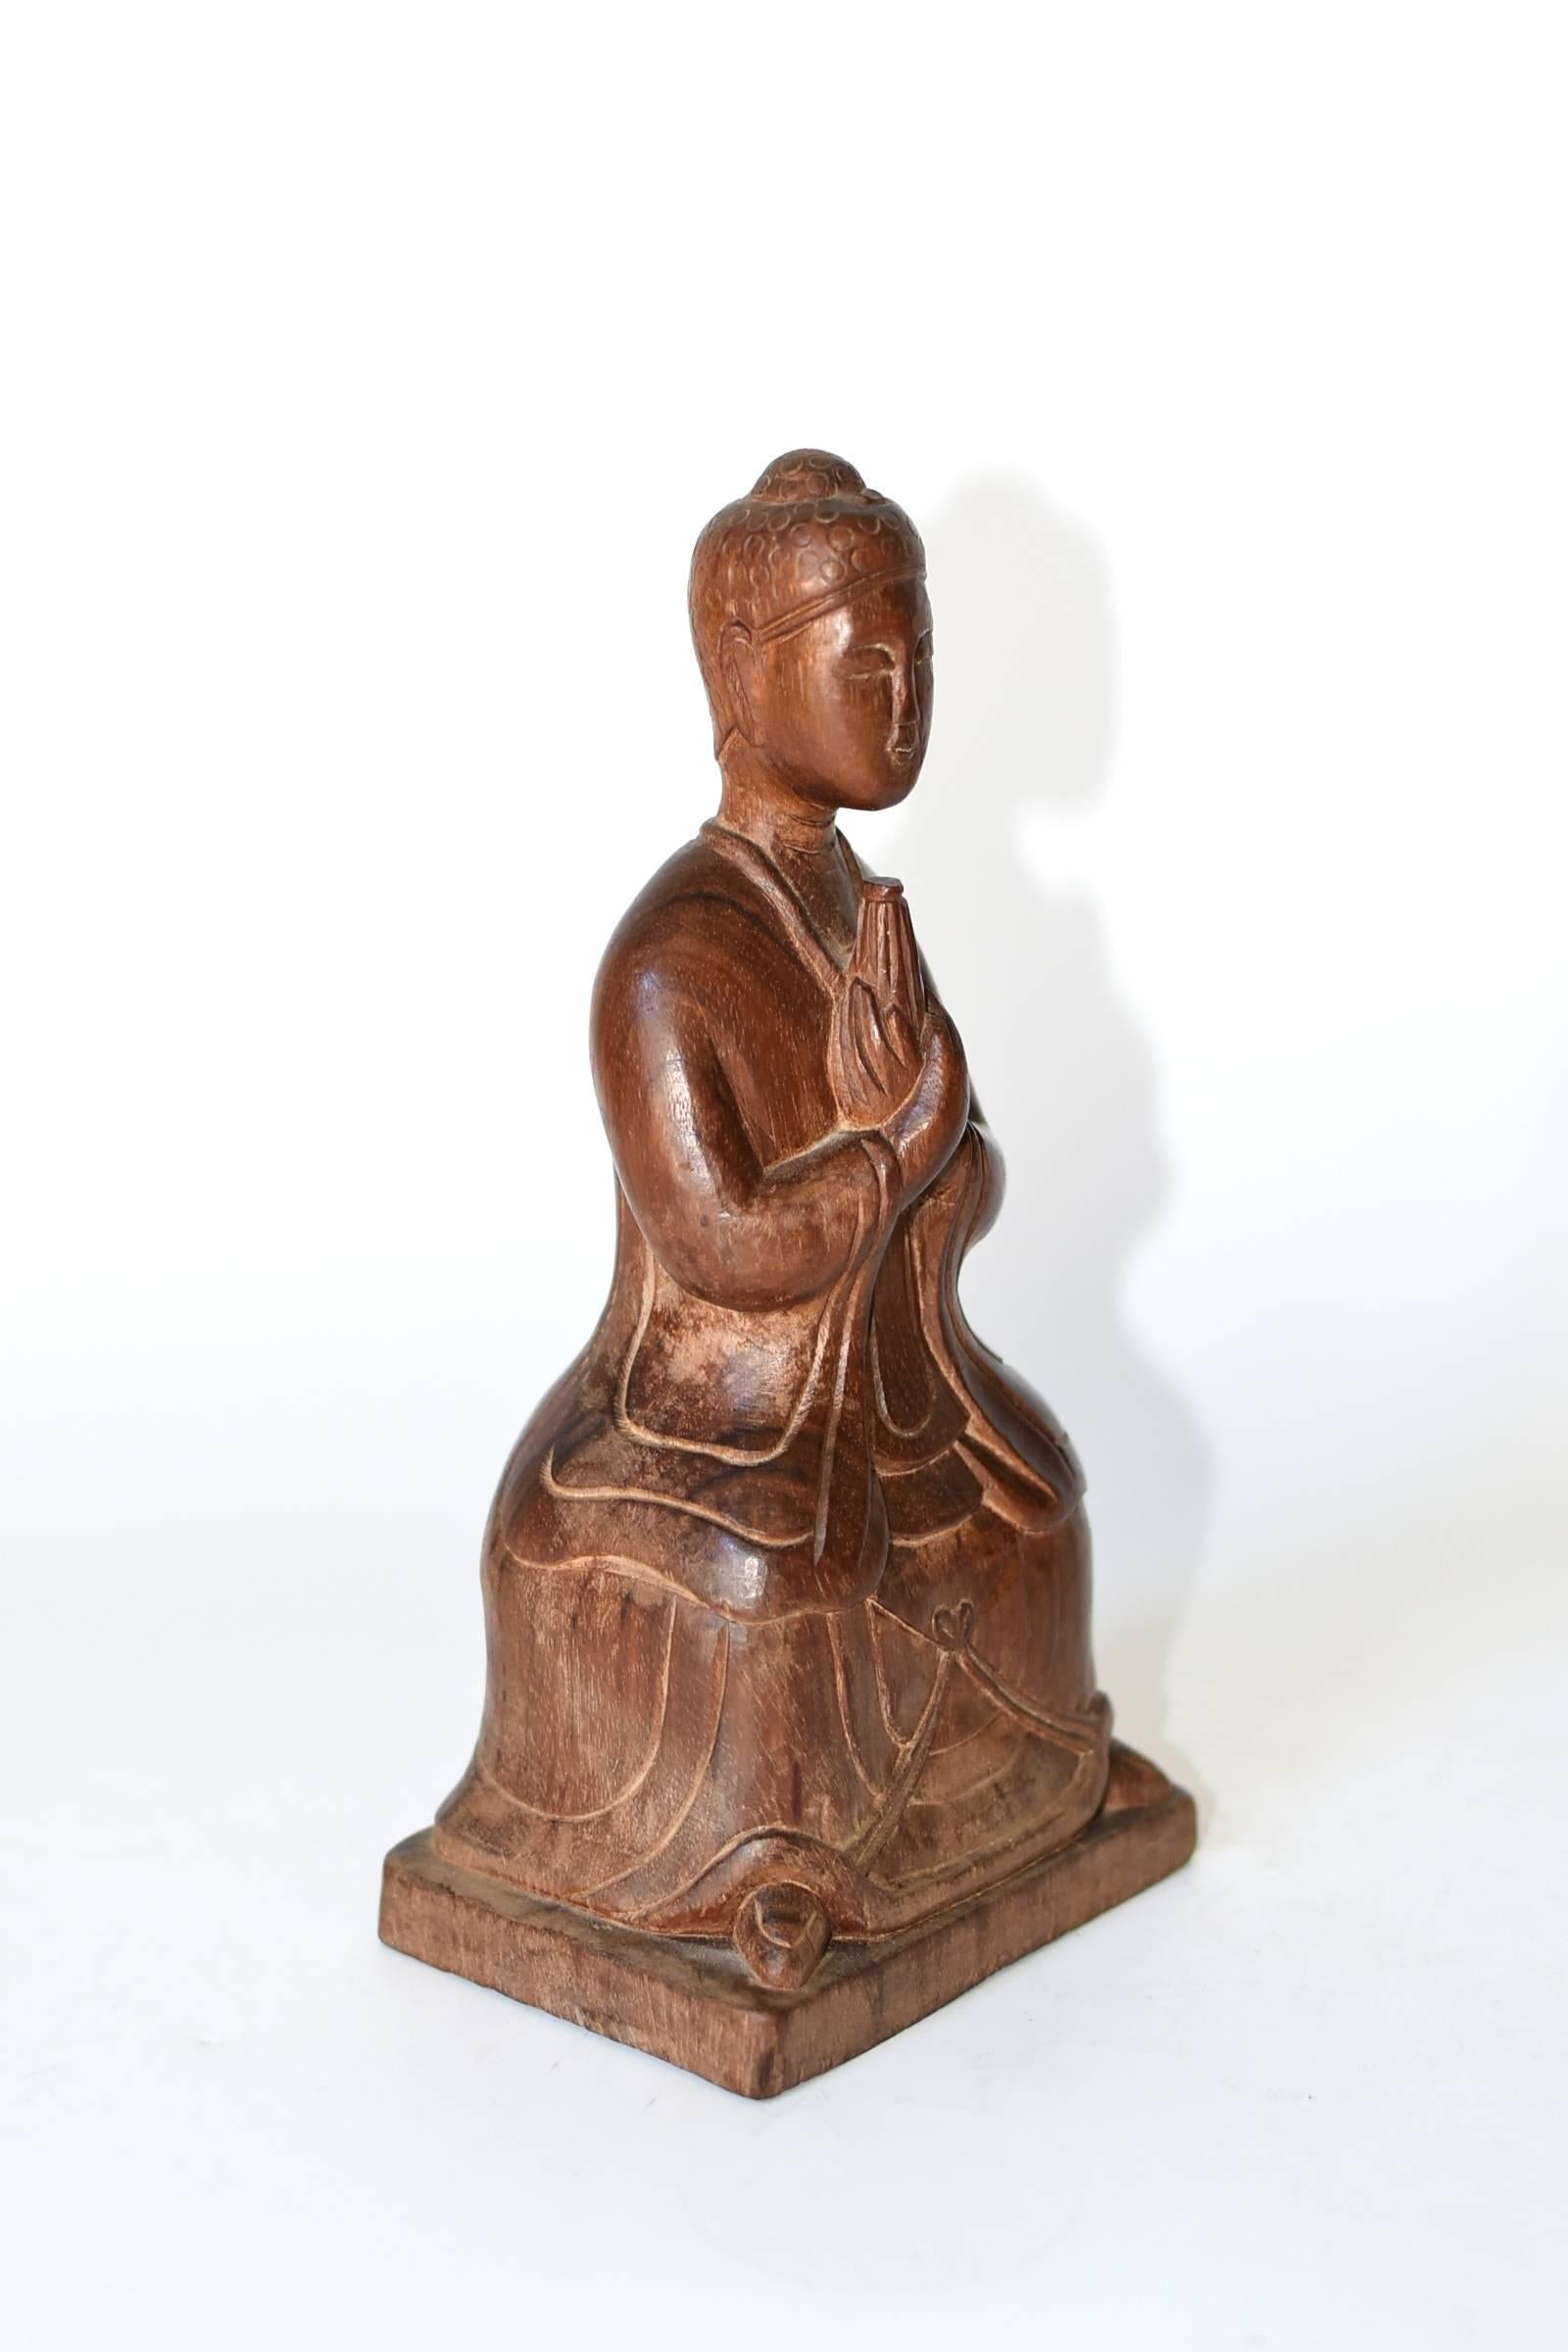 A fine carved Burmese Buddha. The wood used is the prized SE Asian rosewood, with its beautiful grains with thin ebony stripes. The artist captures Buddha's peaceful expression. The depiction of overlapped hands has a resemblance to the lotus